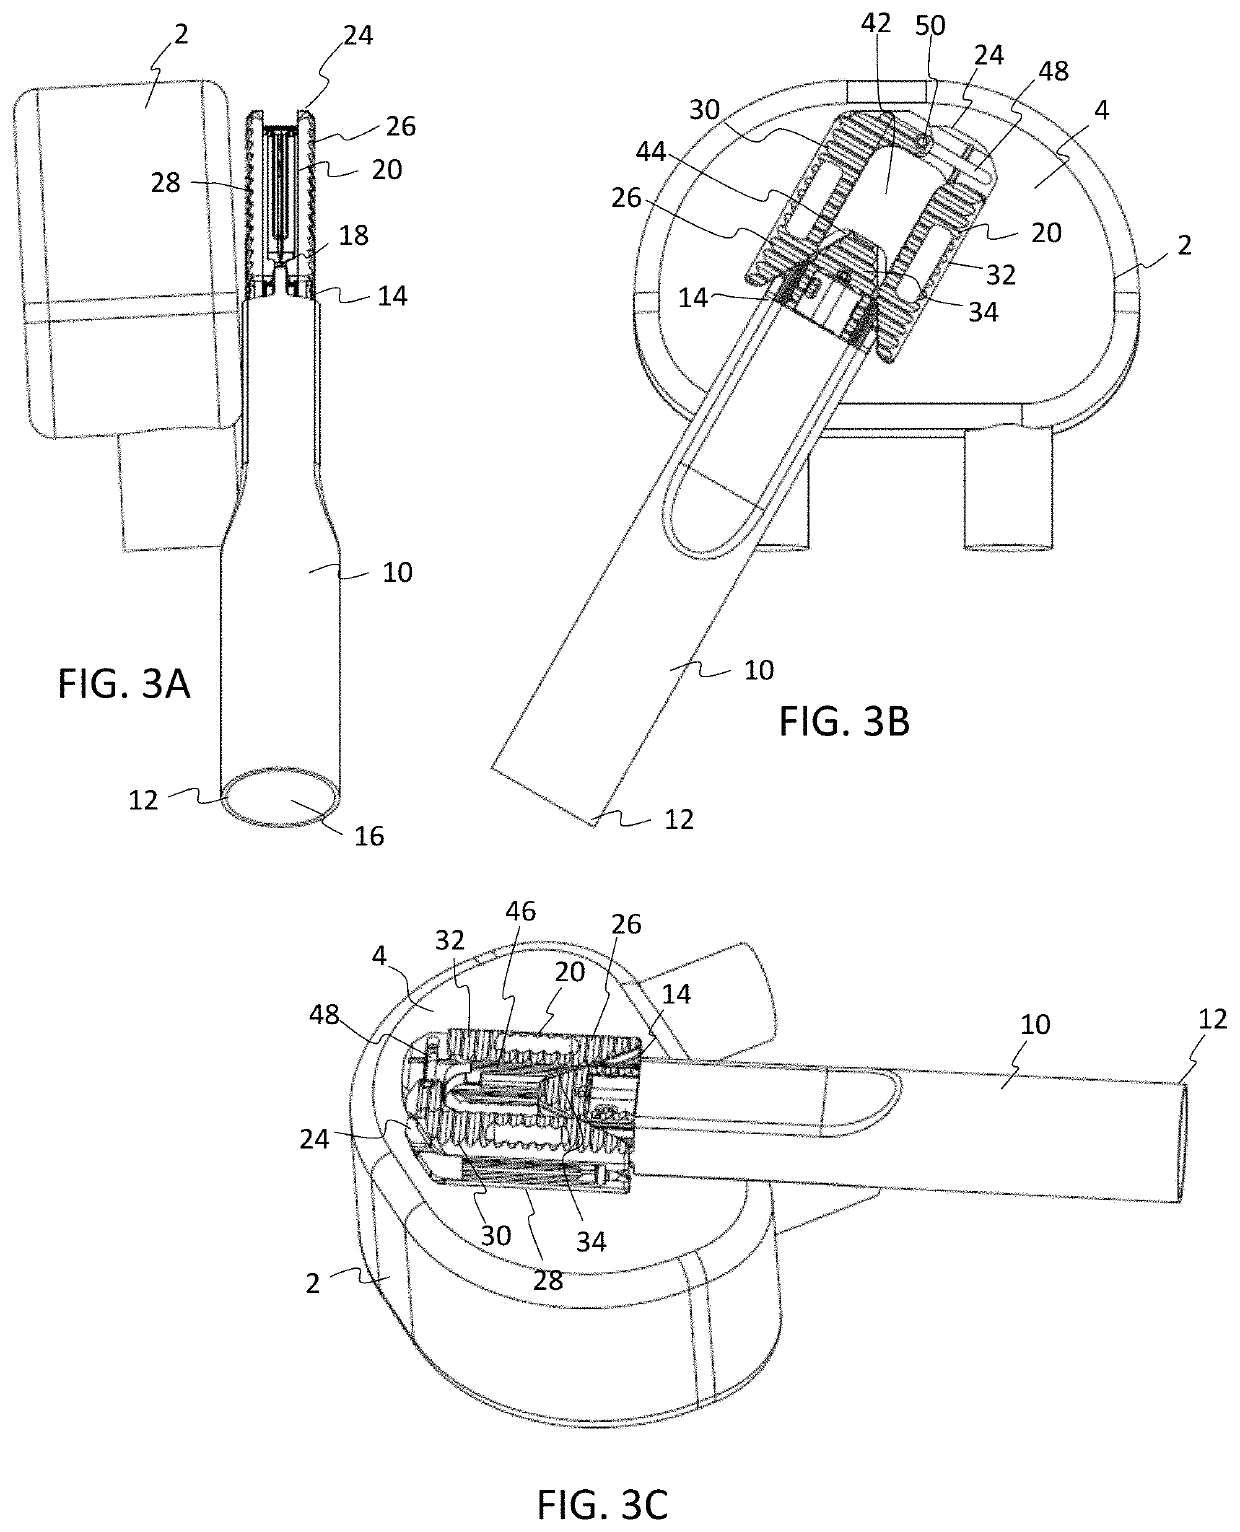 Expandable interbody fusions devices